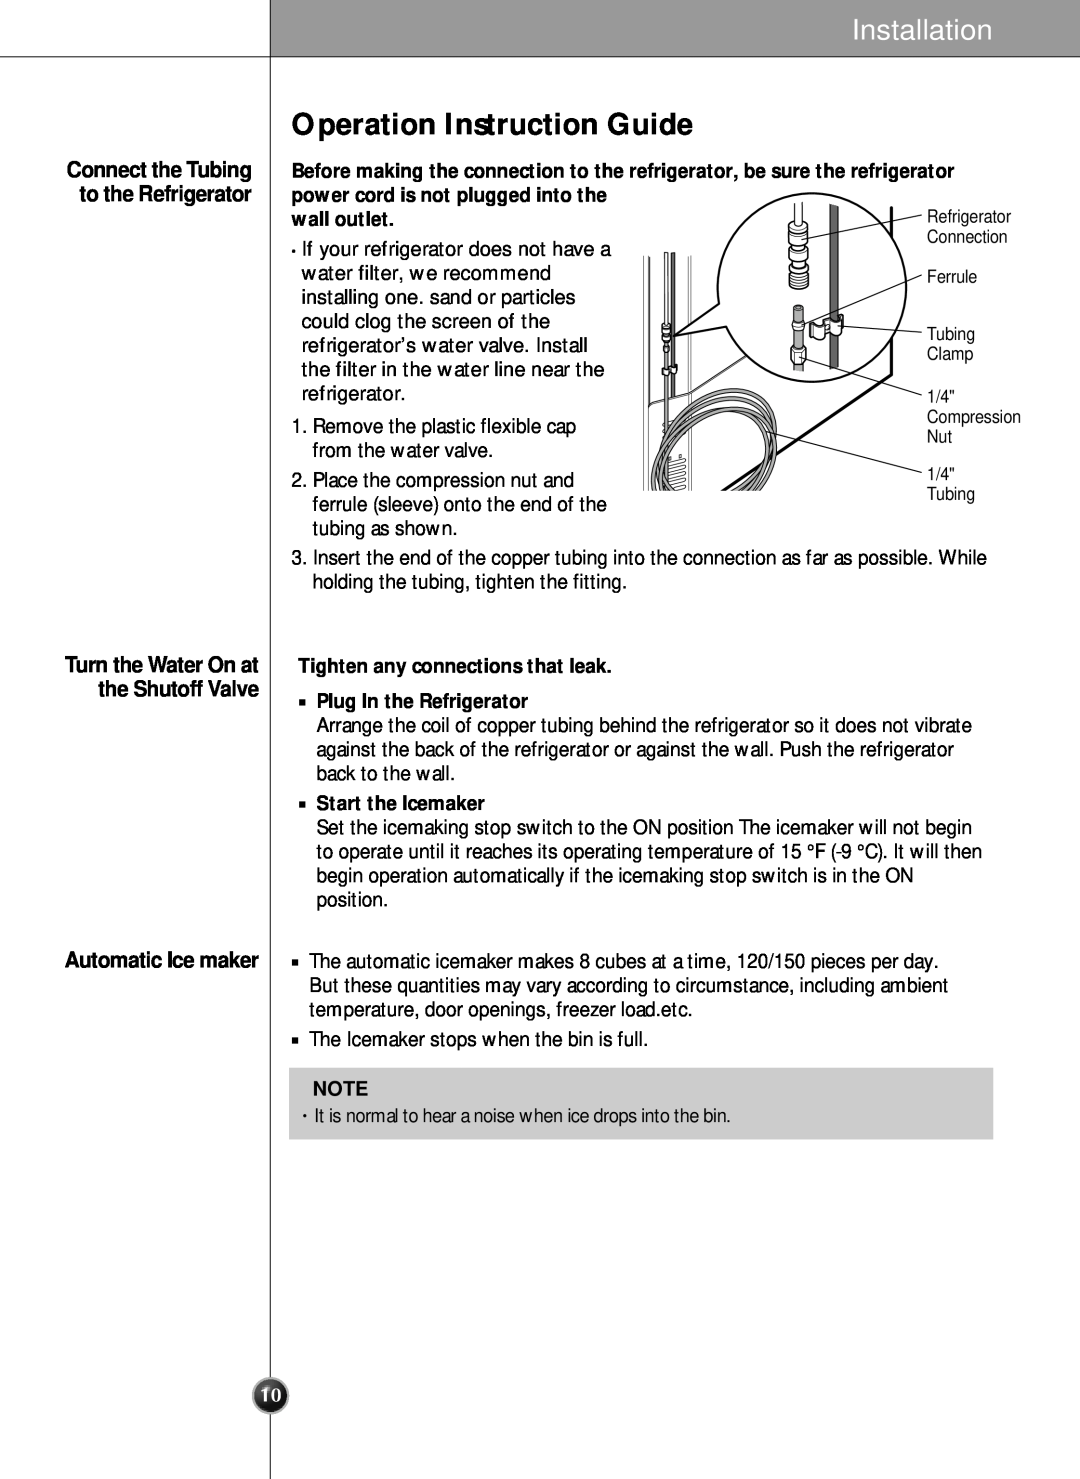 LG Electronics LRSC 26980TT manual Operation Instruction Guide, Automatic Ice maker, Installation, wall outlet 